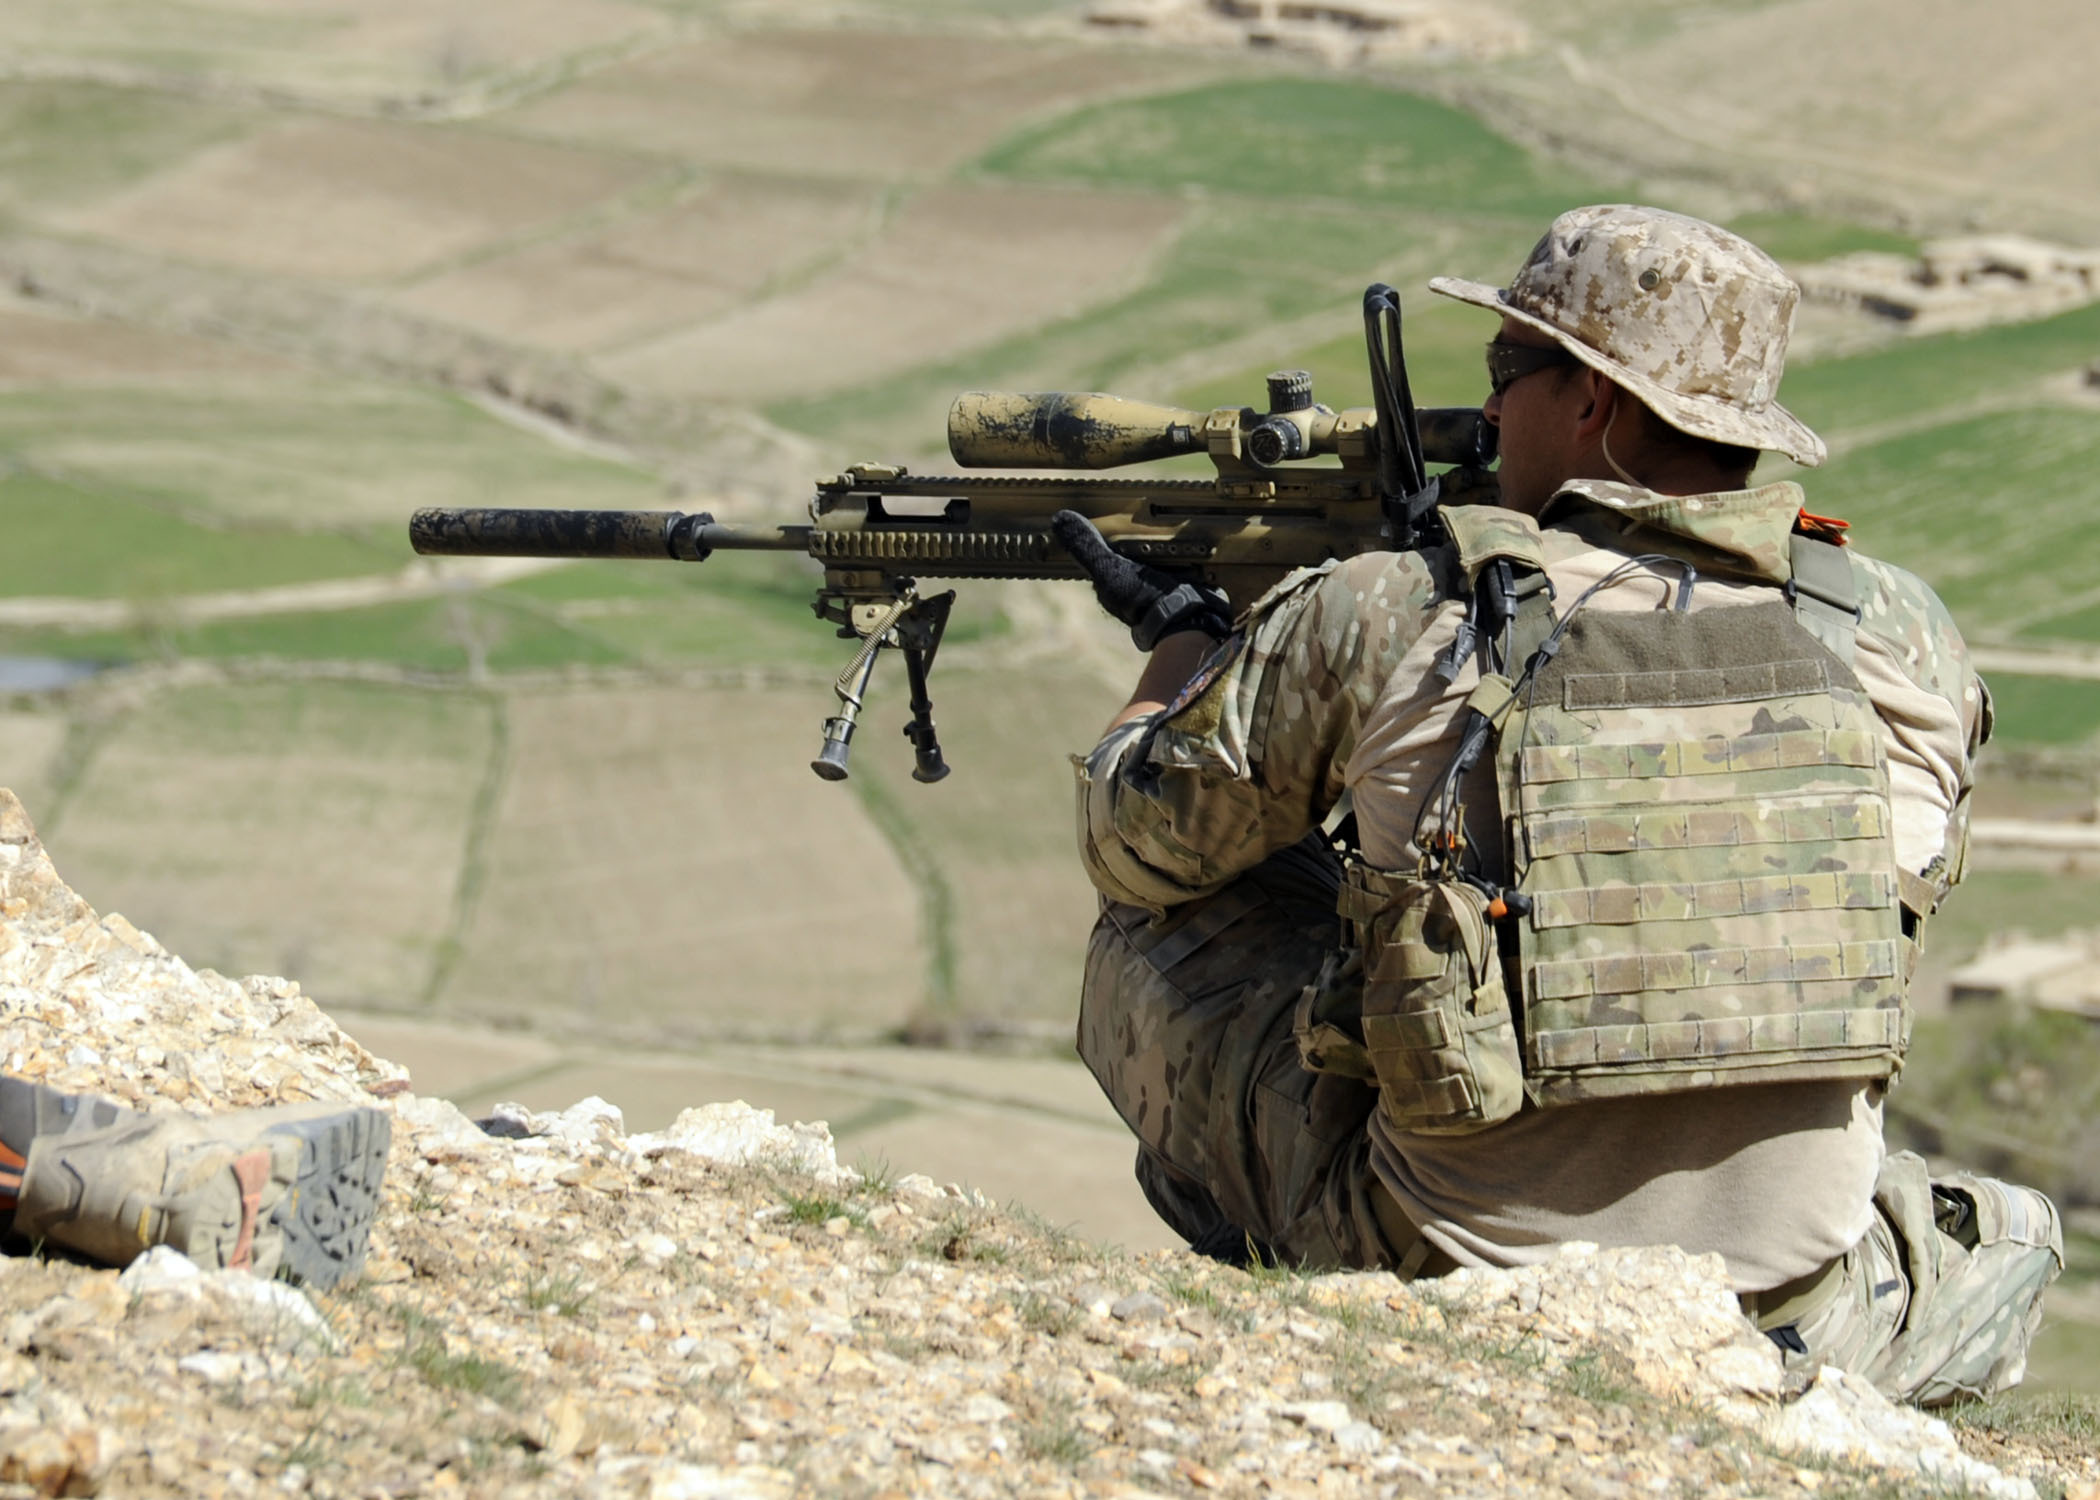 A_coalition_Special_Operations_Forces_member_fires_his_sniper_rifle_from_a_hilltop_during_a_firefight_near_Nawa_Garay_village_(120403-N-MY805-202).jpg